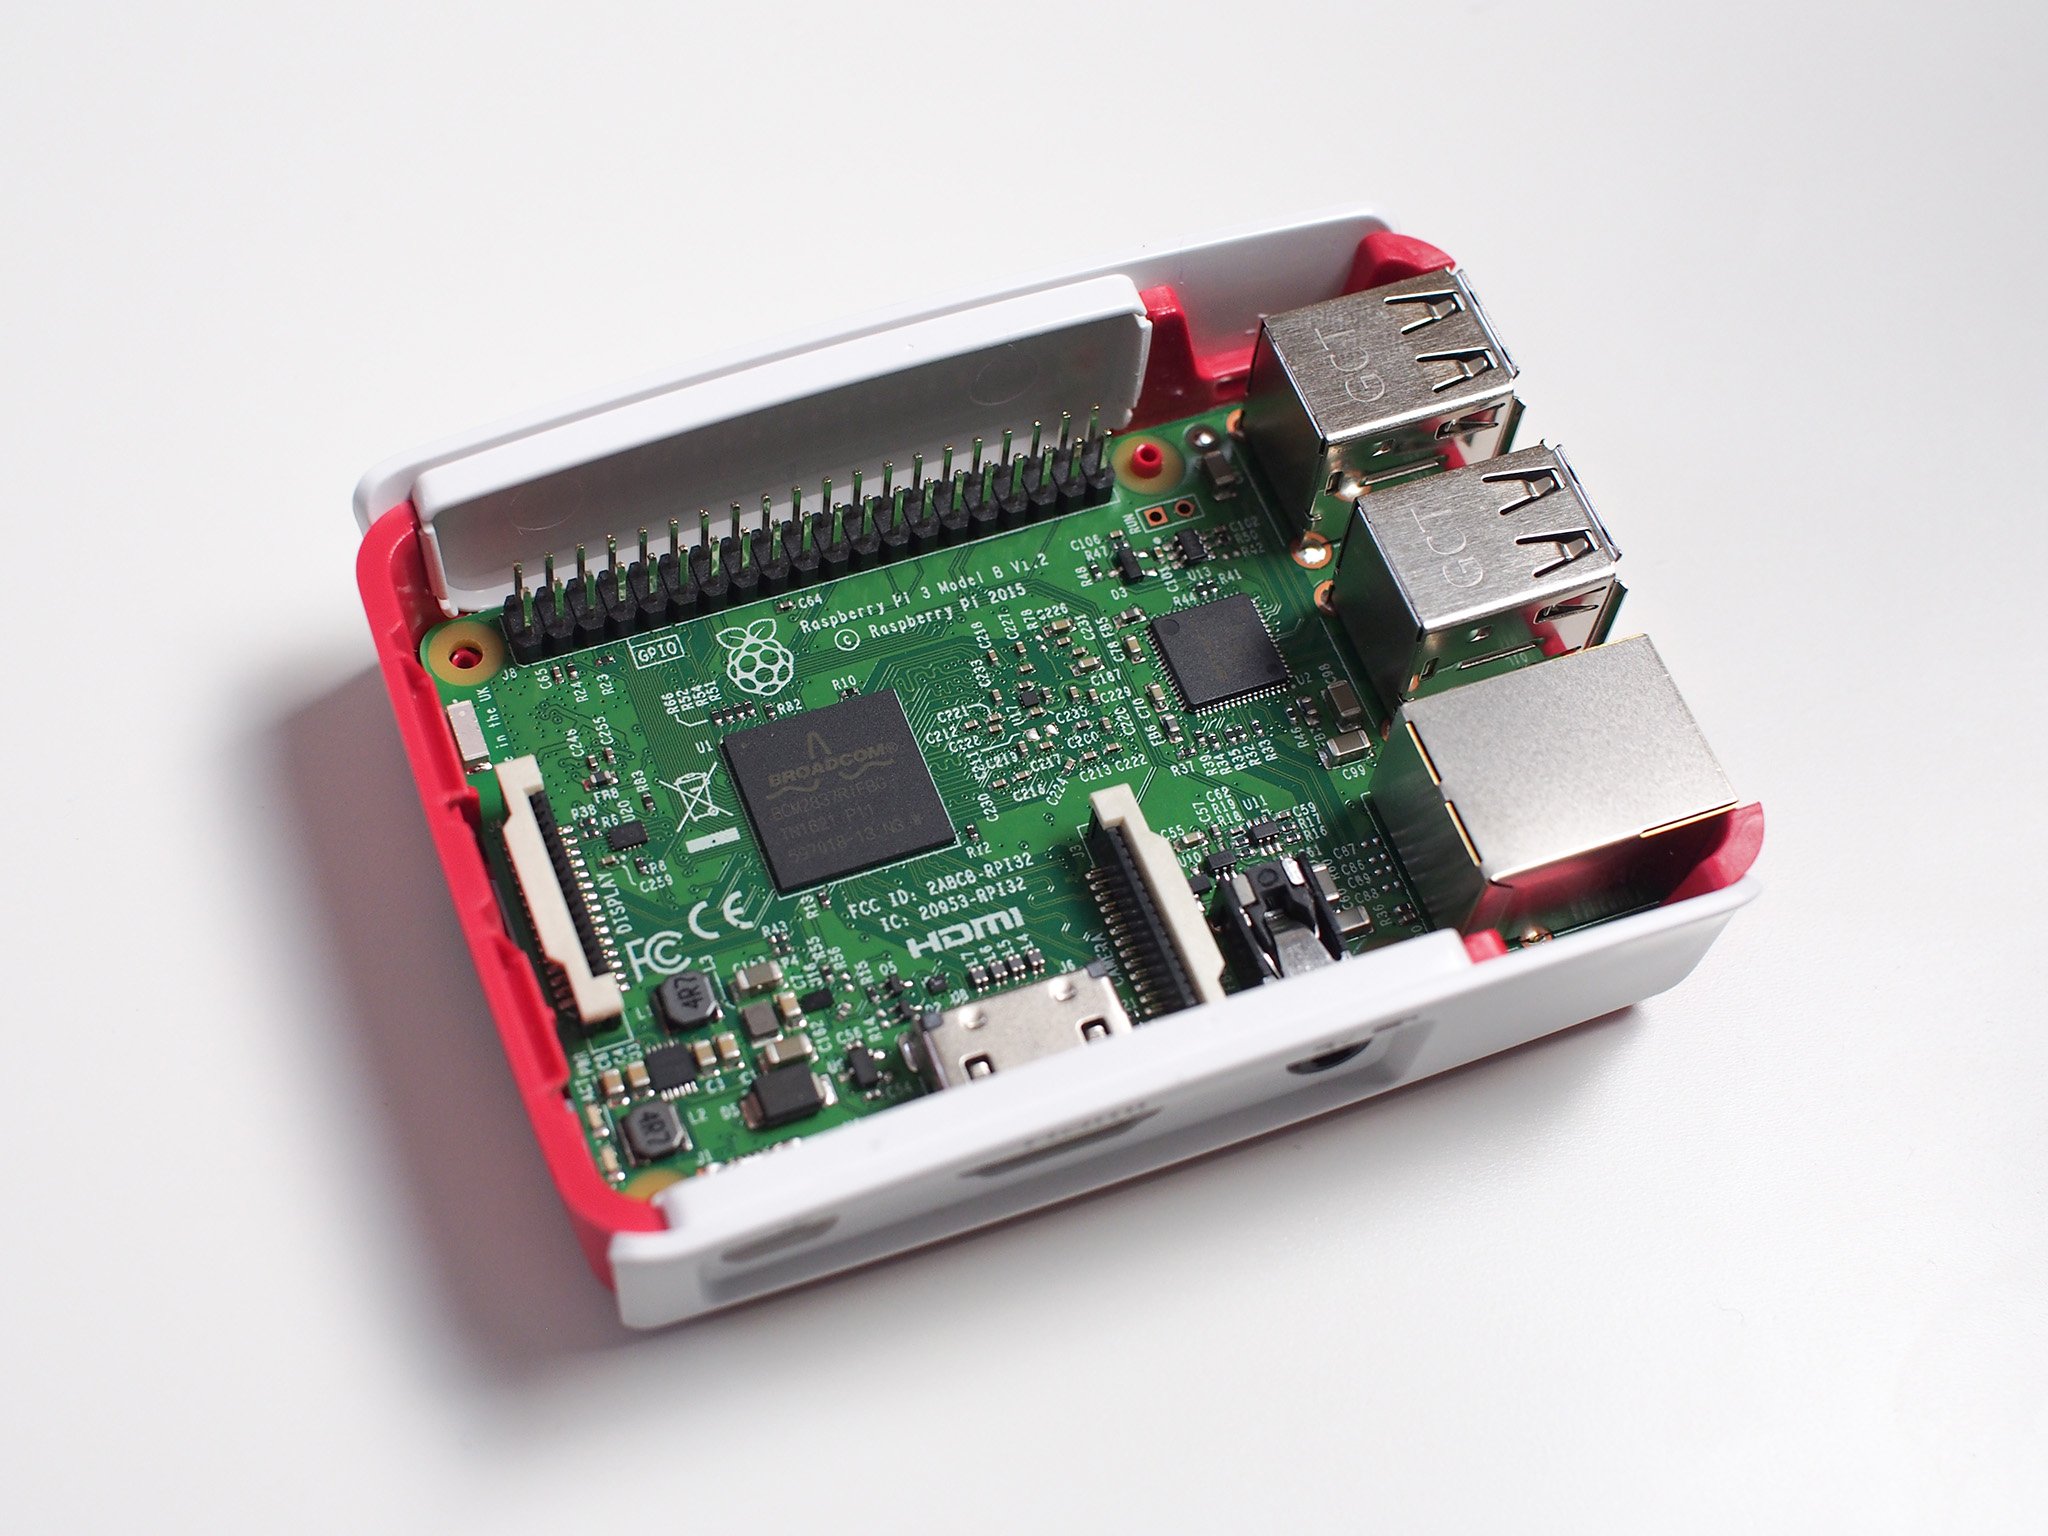 fun of DIY: Raspberry Pi 3 vs Raspberry Pi 2, what do we know about it now